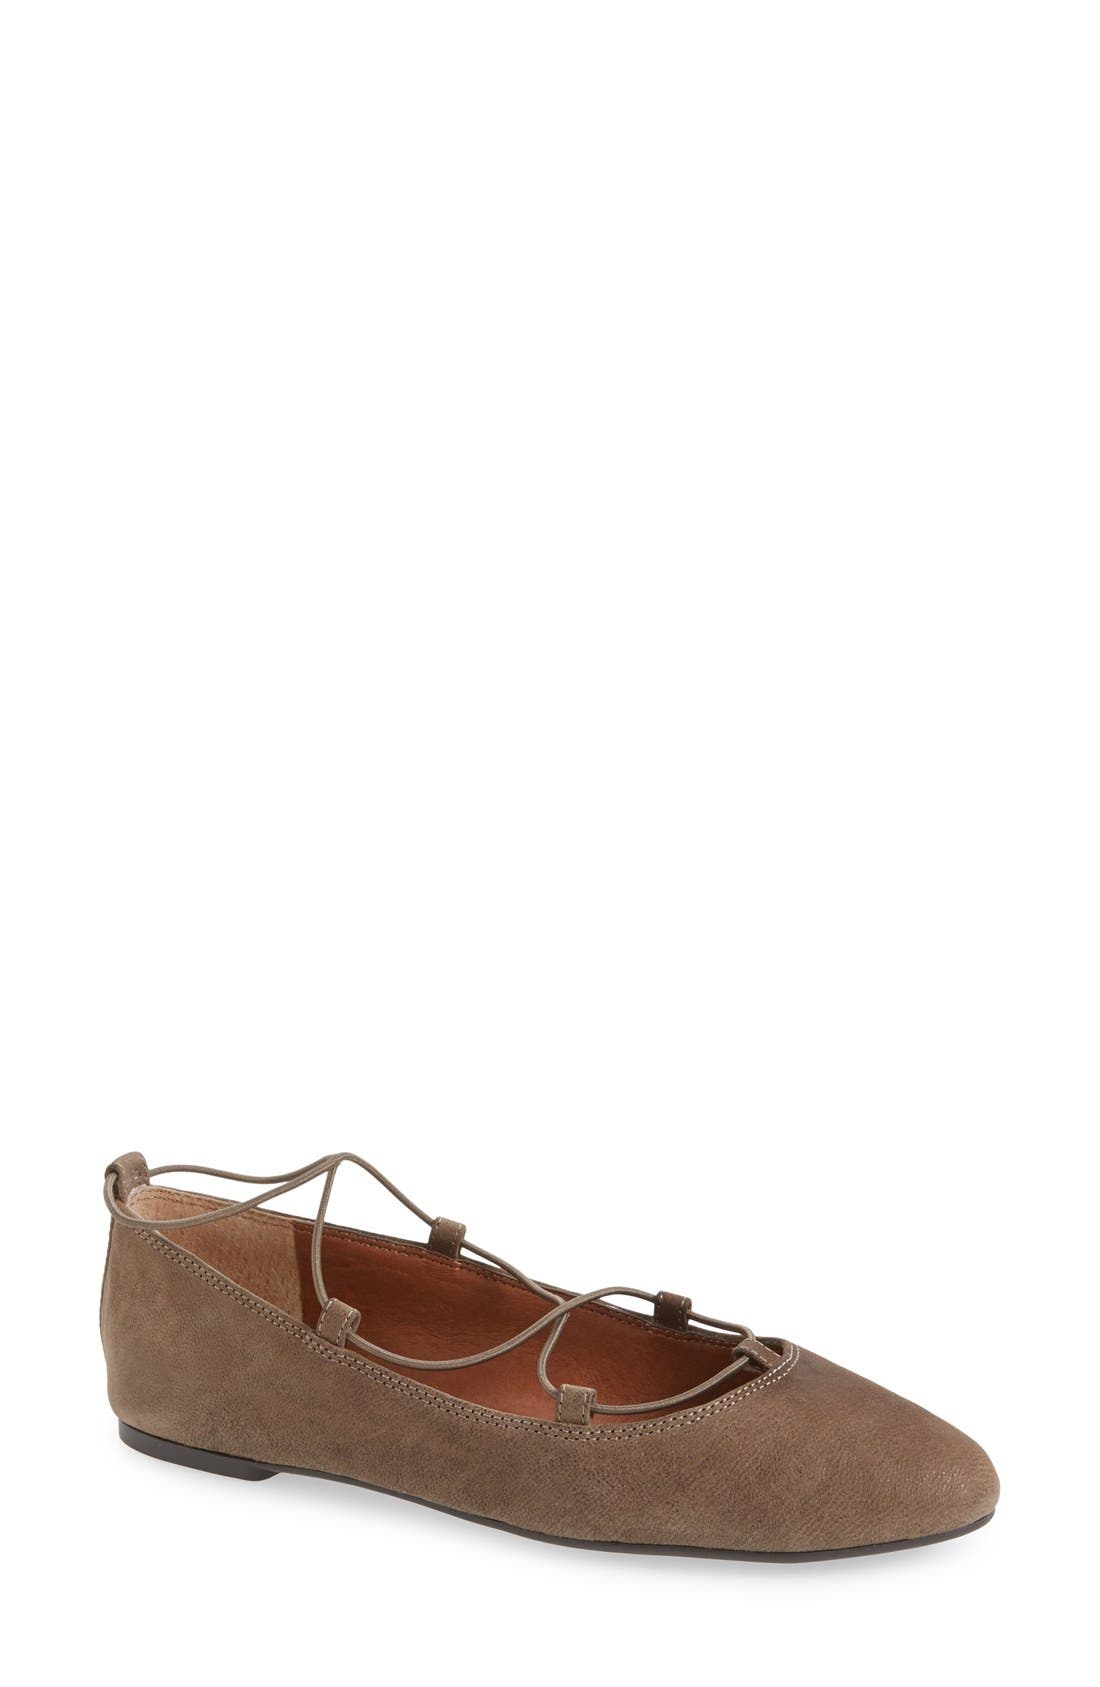 lucky brand aviee lace up flats